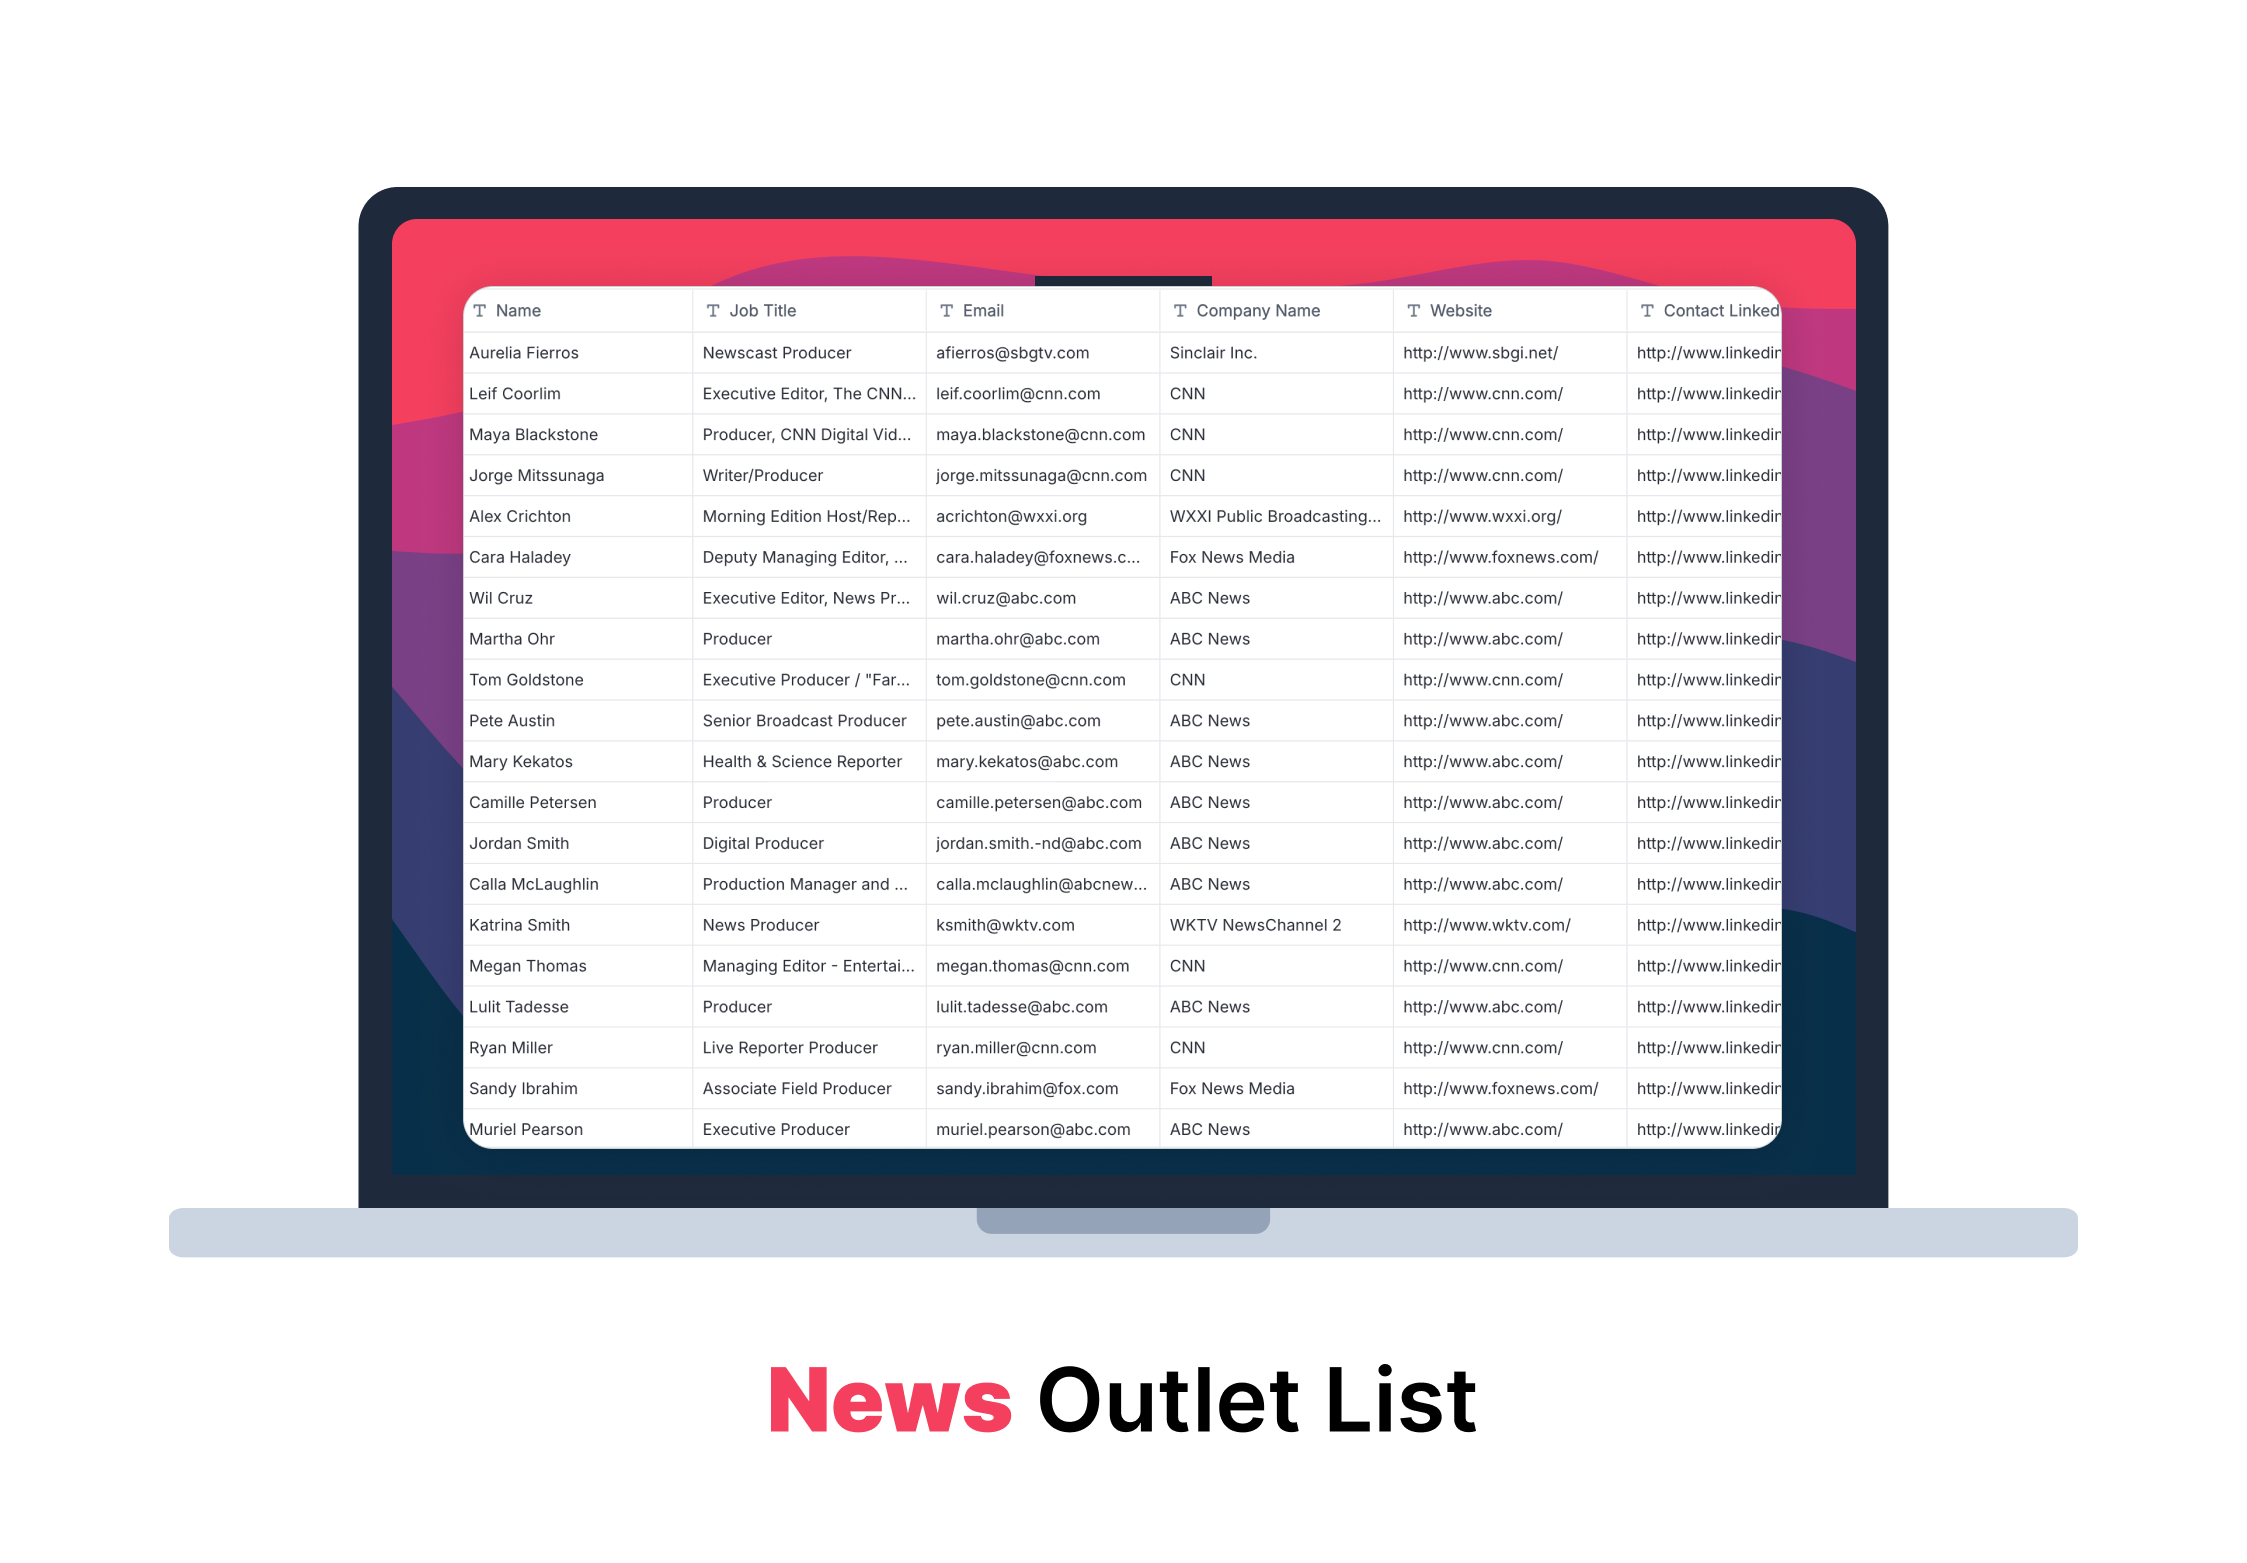 News Outlet List Offers Direct Access to Media Contact List at Top 1000 News Outlets